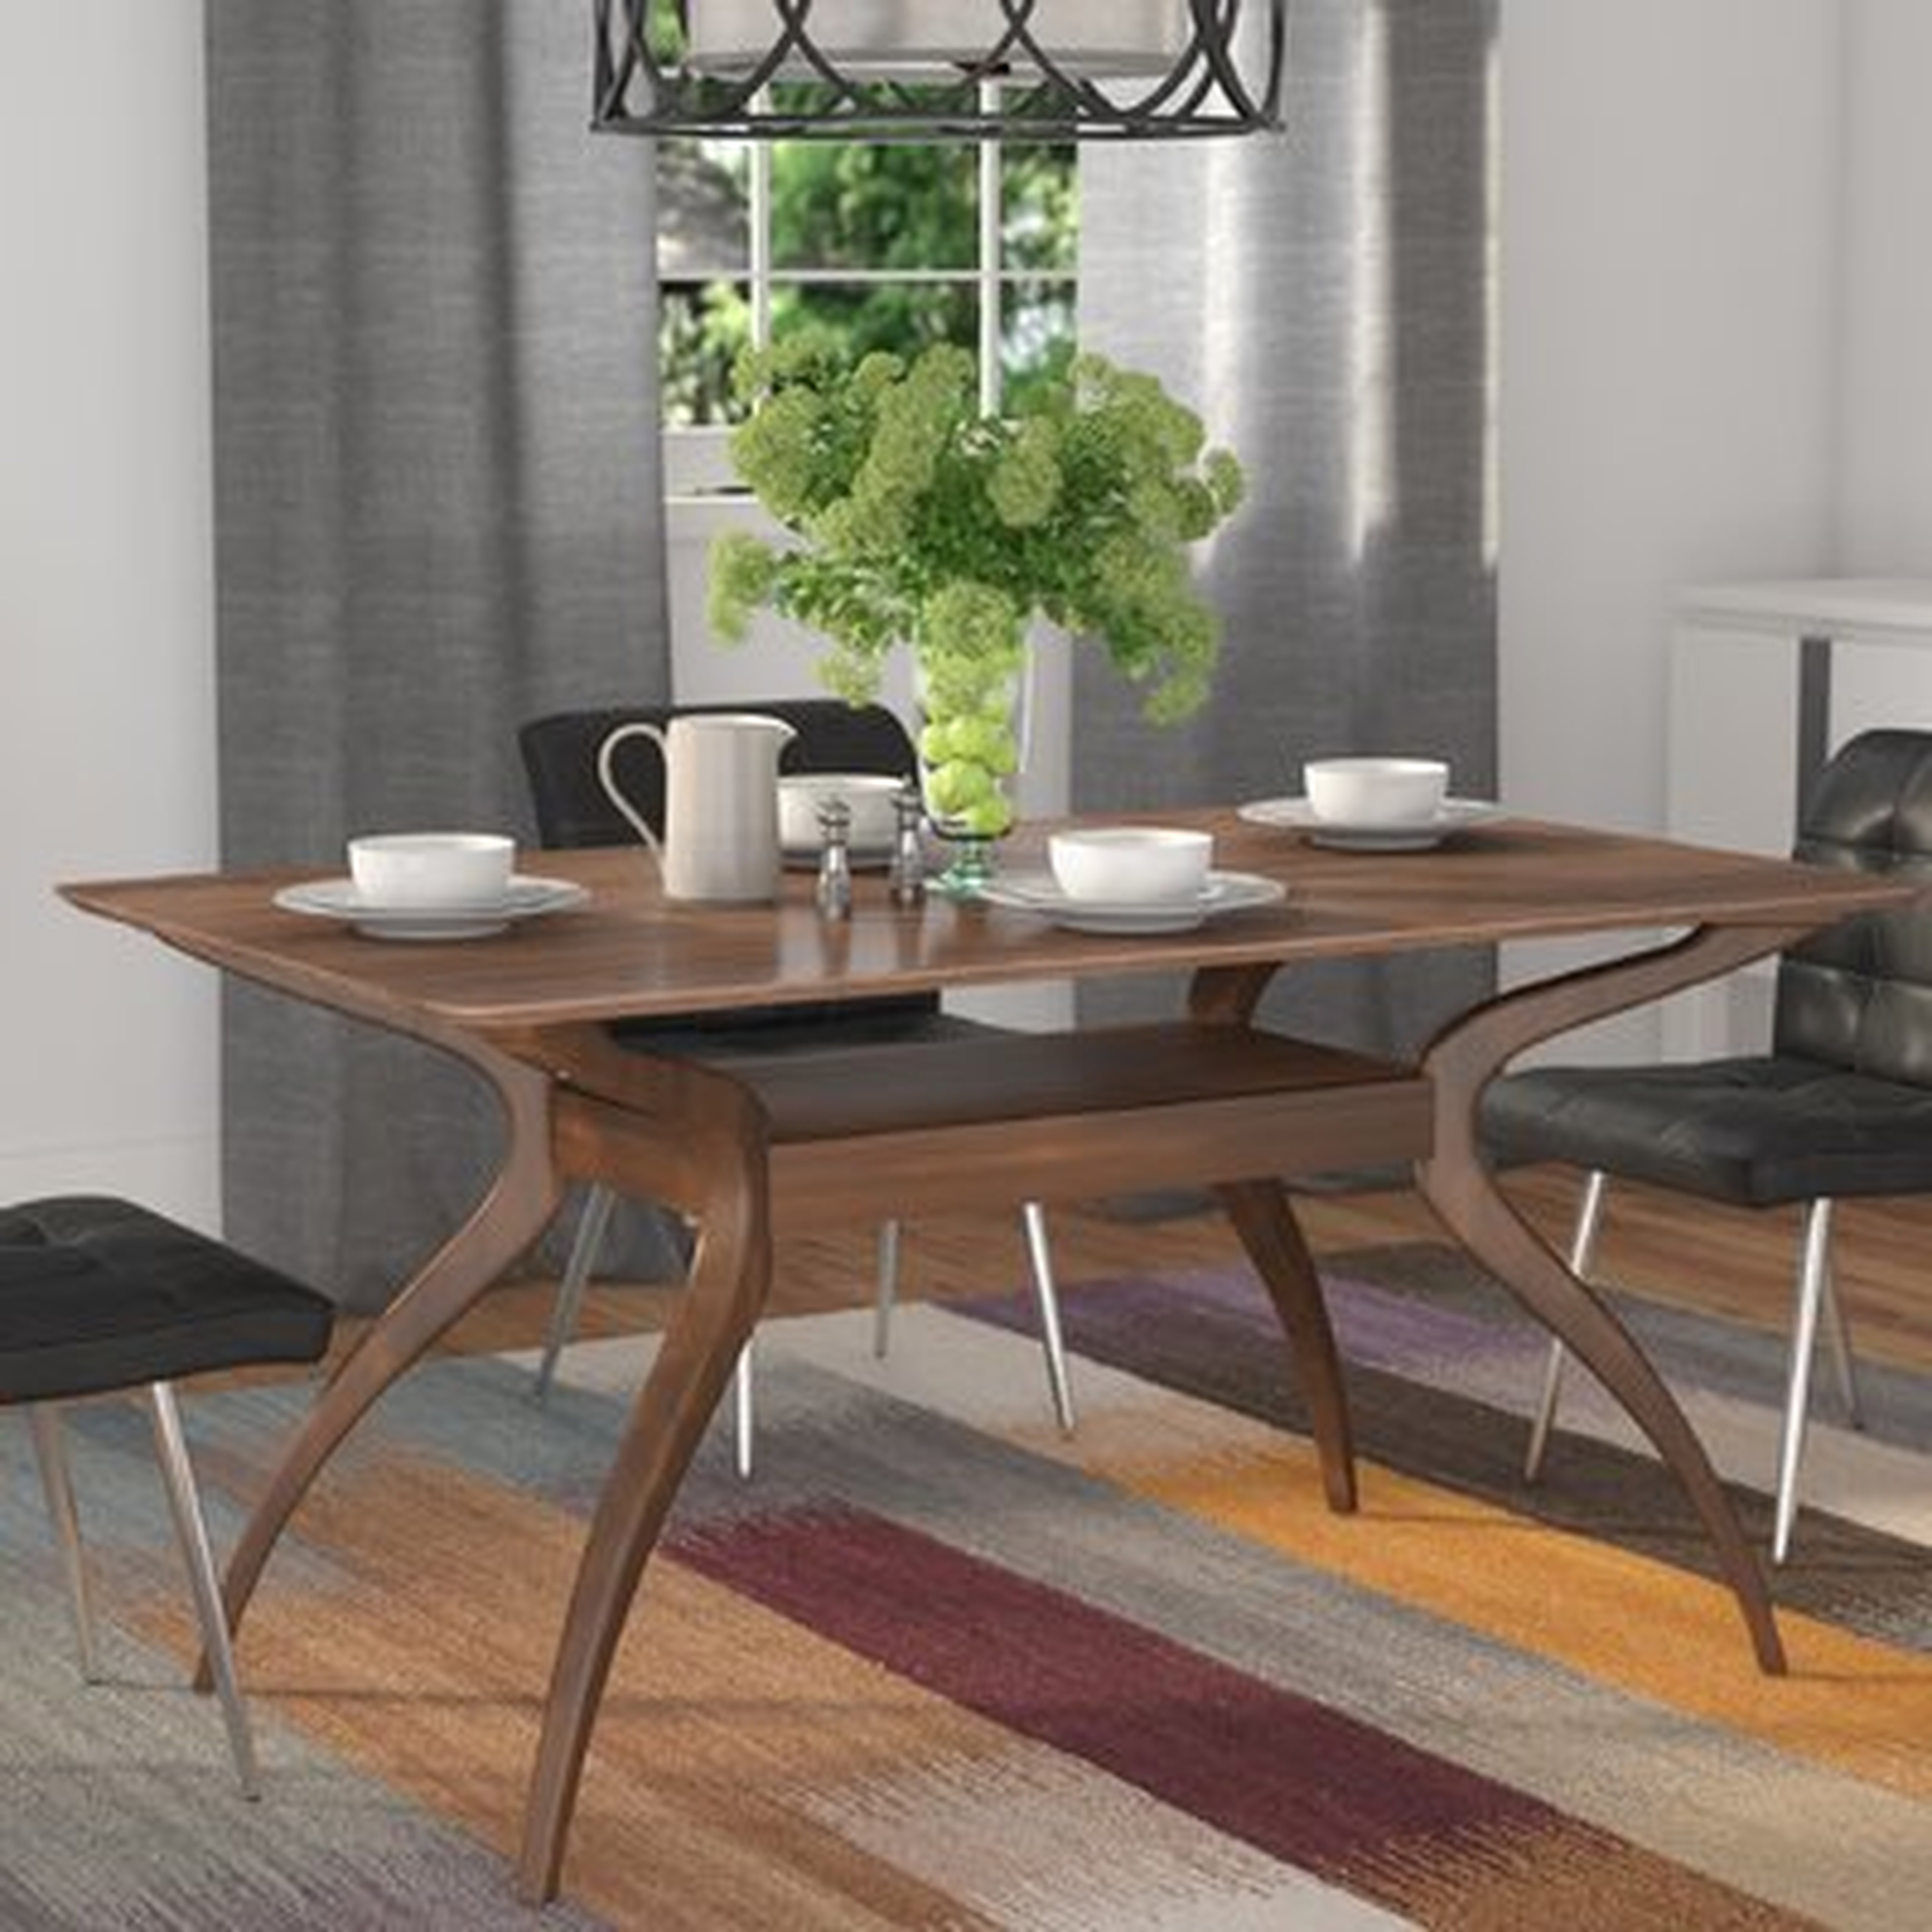 Paterson Dining Table - AllModern